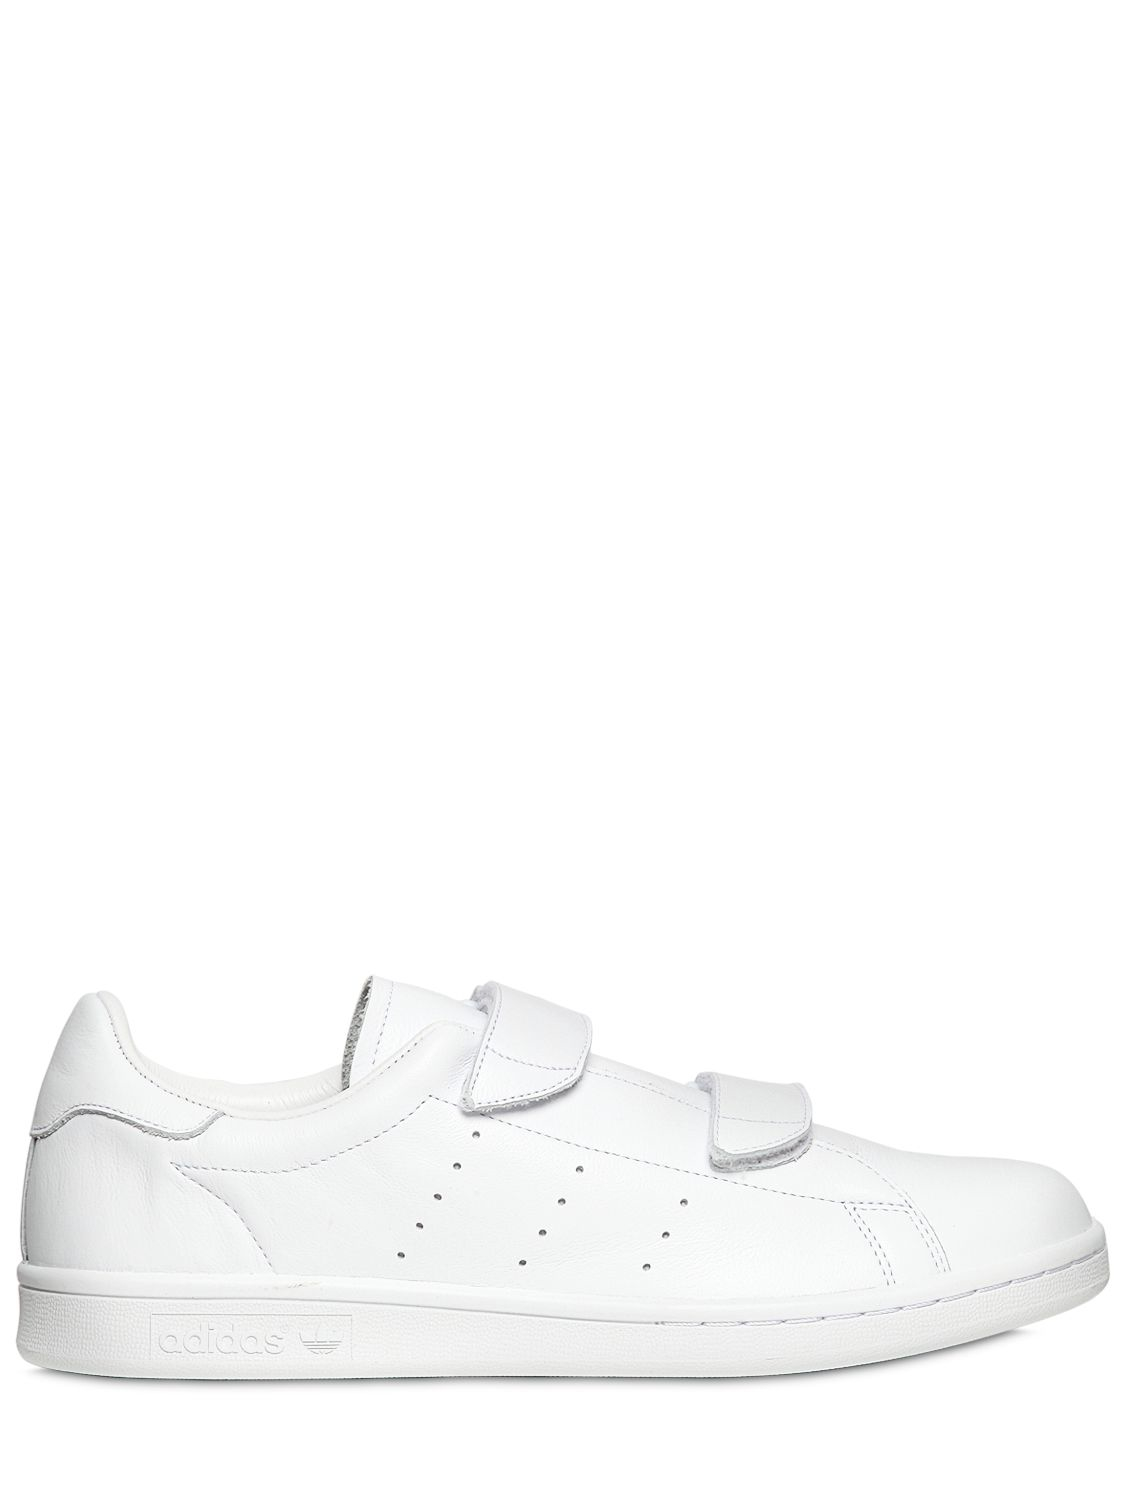 Lyst - adidas Originals Hyke Velcro Leather Sneakers in White for Men